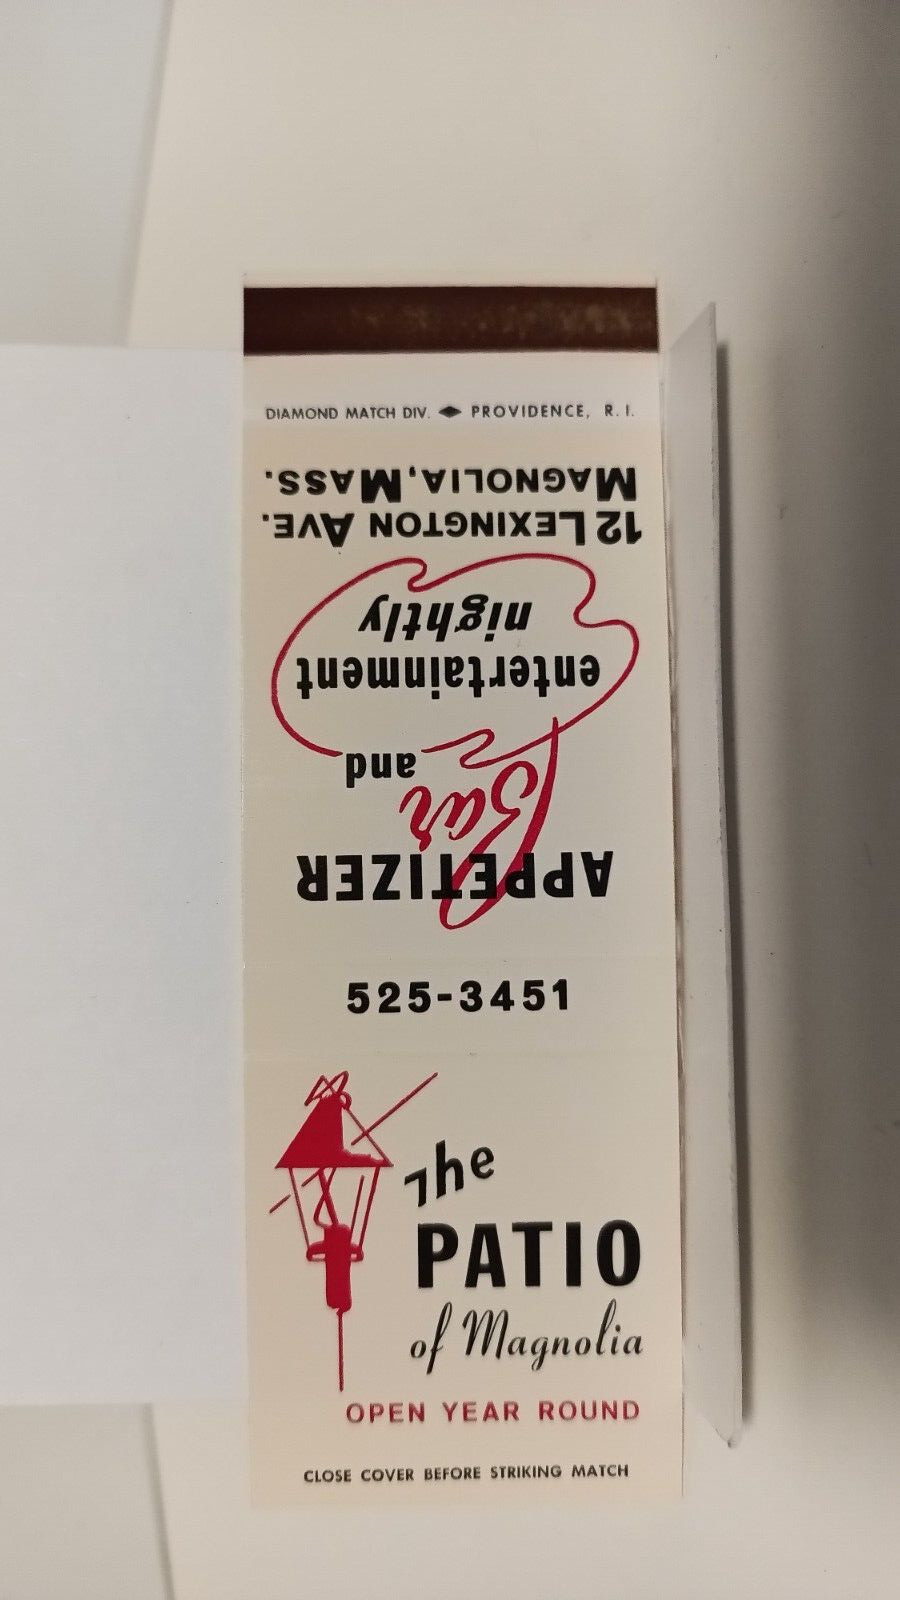 Vintage Matchbook - THE PATIO OF MAGNOLIA MASS